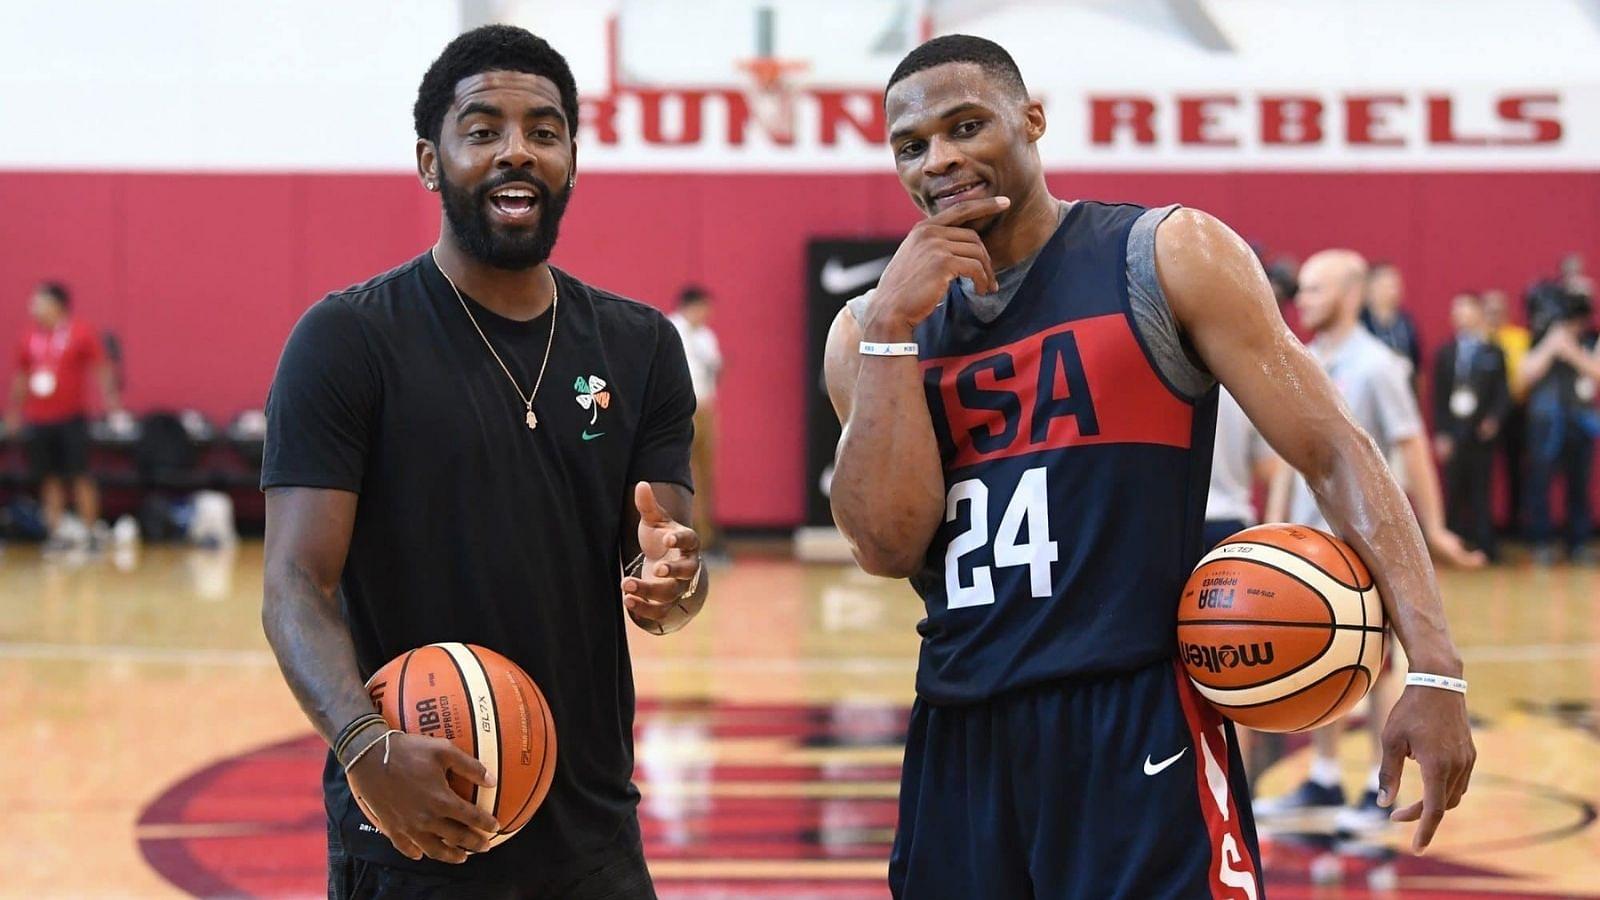 “Kyrie Irving for Russell Westbrook LOADING… KD and LeBron reunite with their Ex’s!”: Fans are excited for Lakers and Nets superstars to swap jerseys